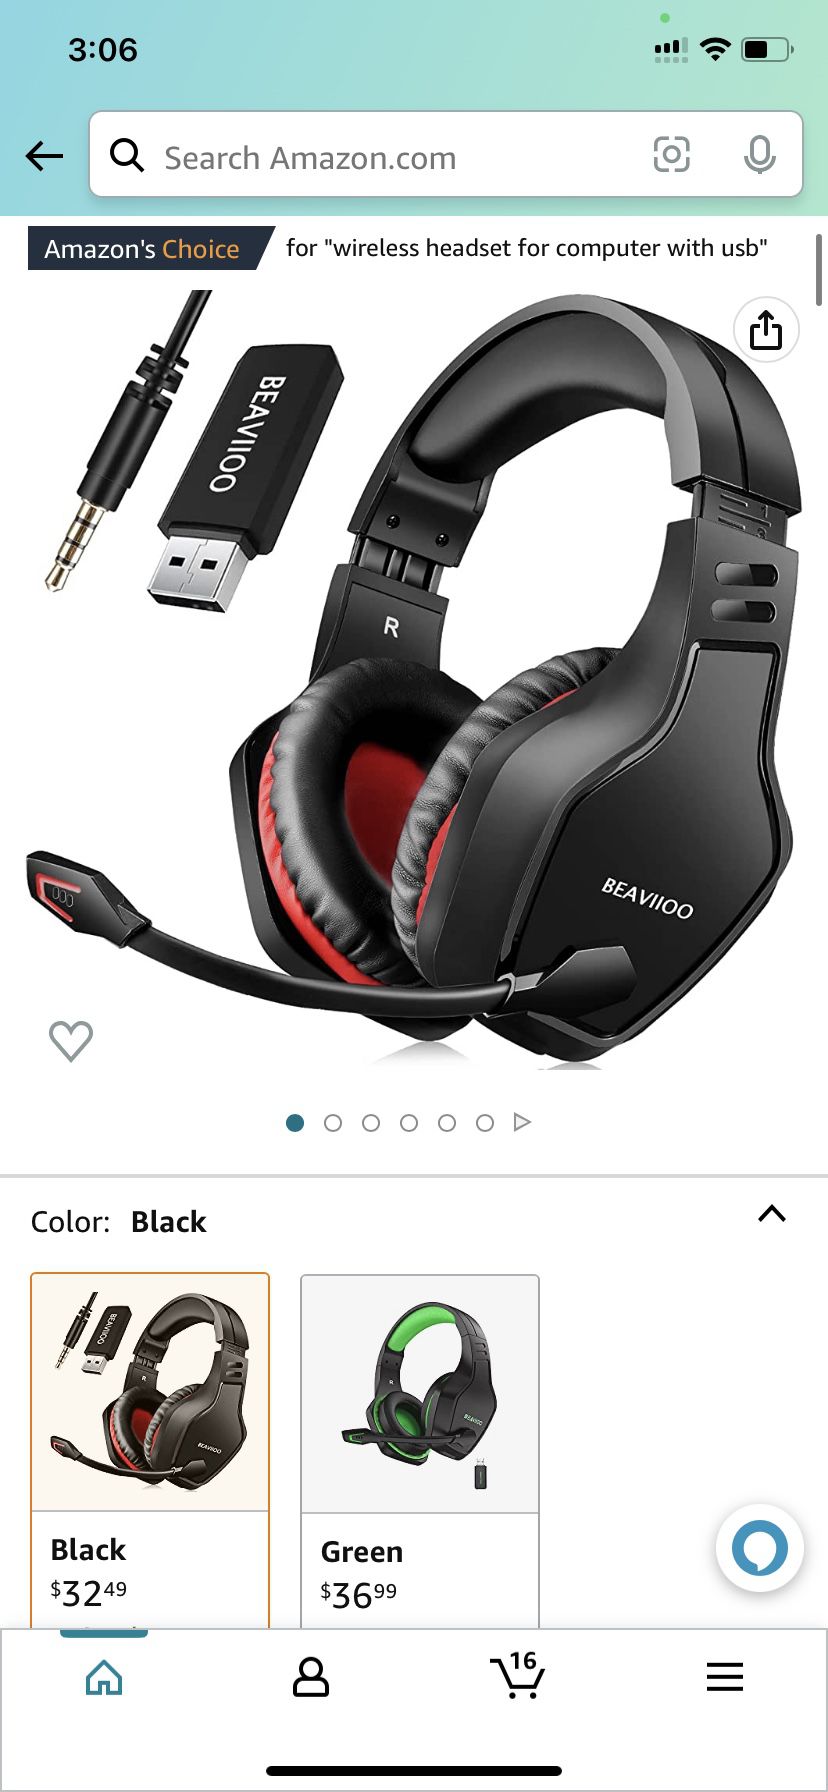 for "wireless headset for computer with usb"